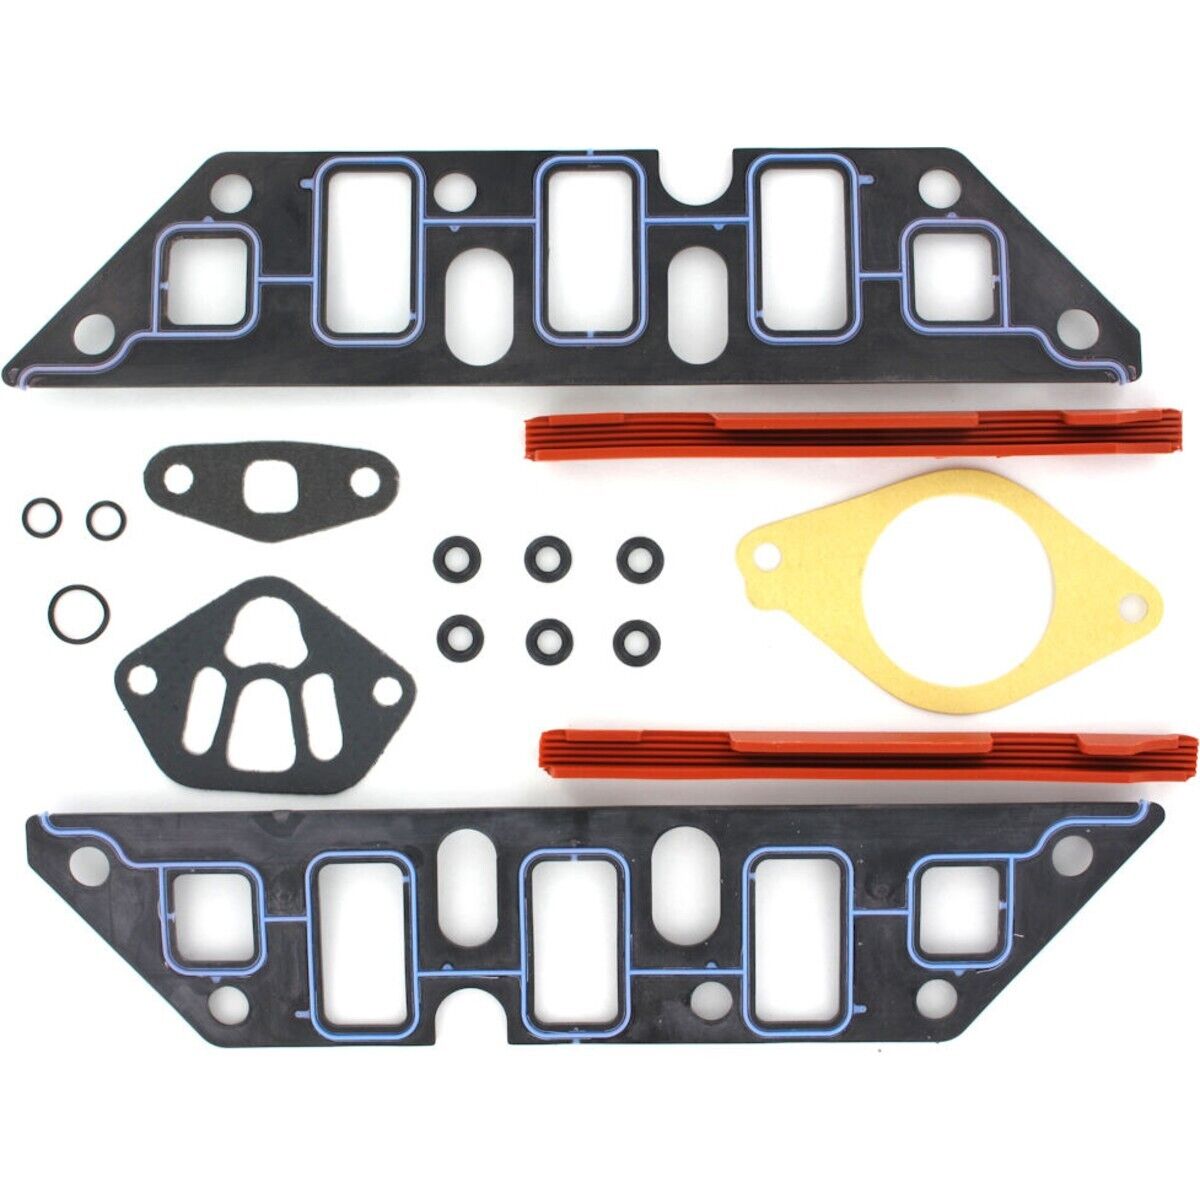 AMS3550 APEX Intake Manifold Gaskets Set for Olds Le Sabre NINETY EIGHT LeSabre